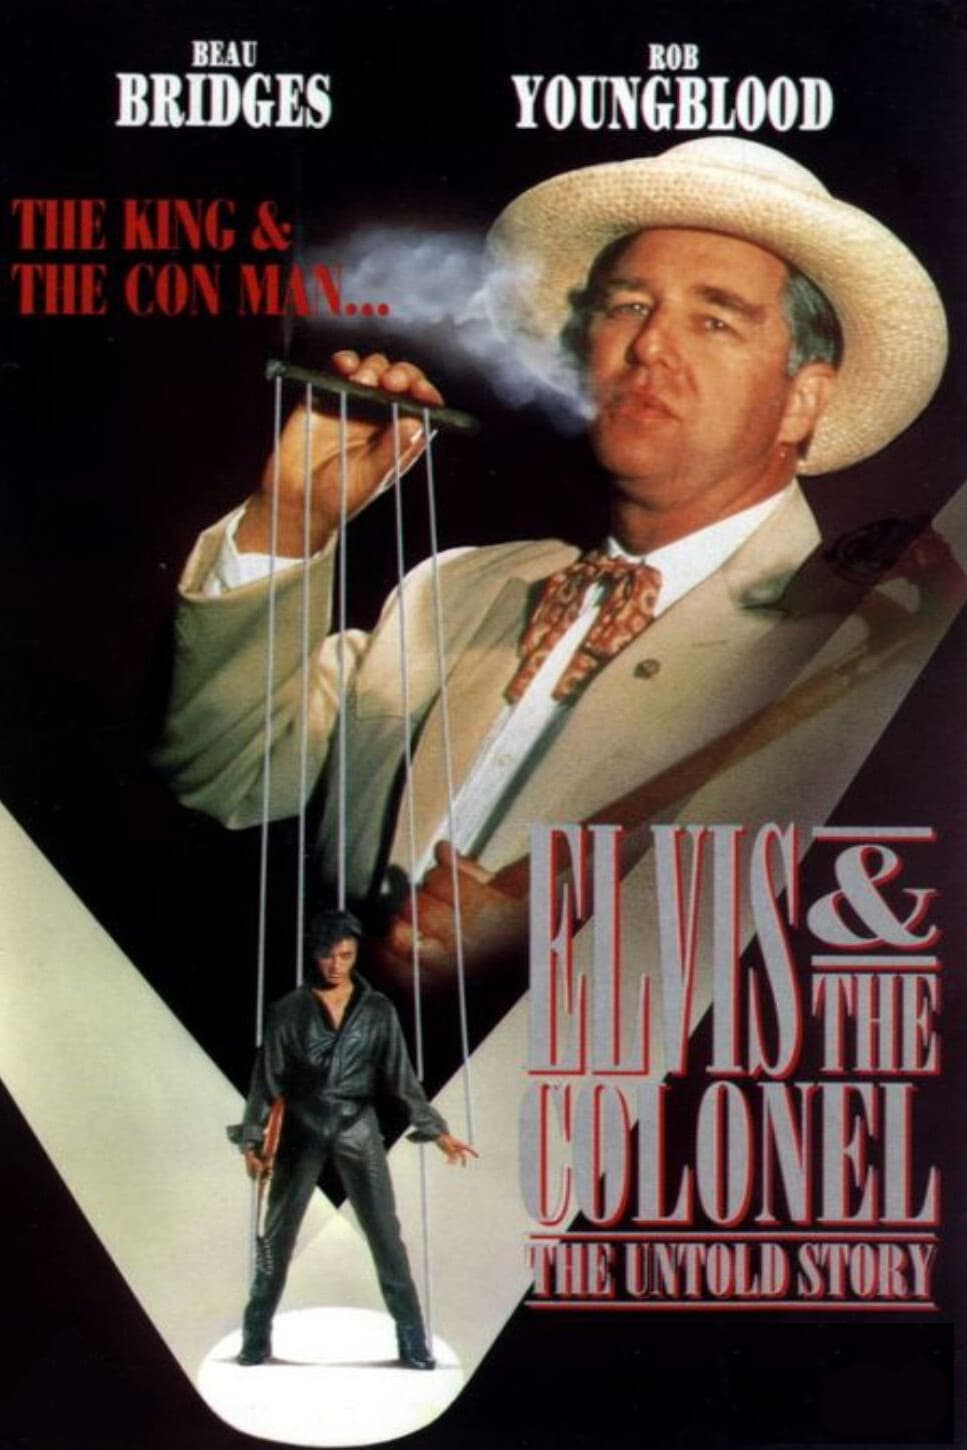 Elvis and the Colonel: The Untold Story